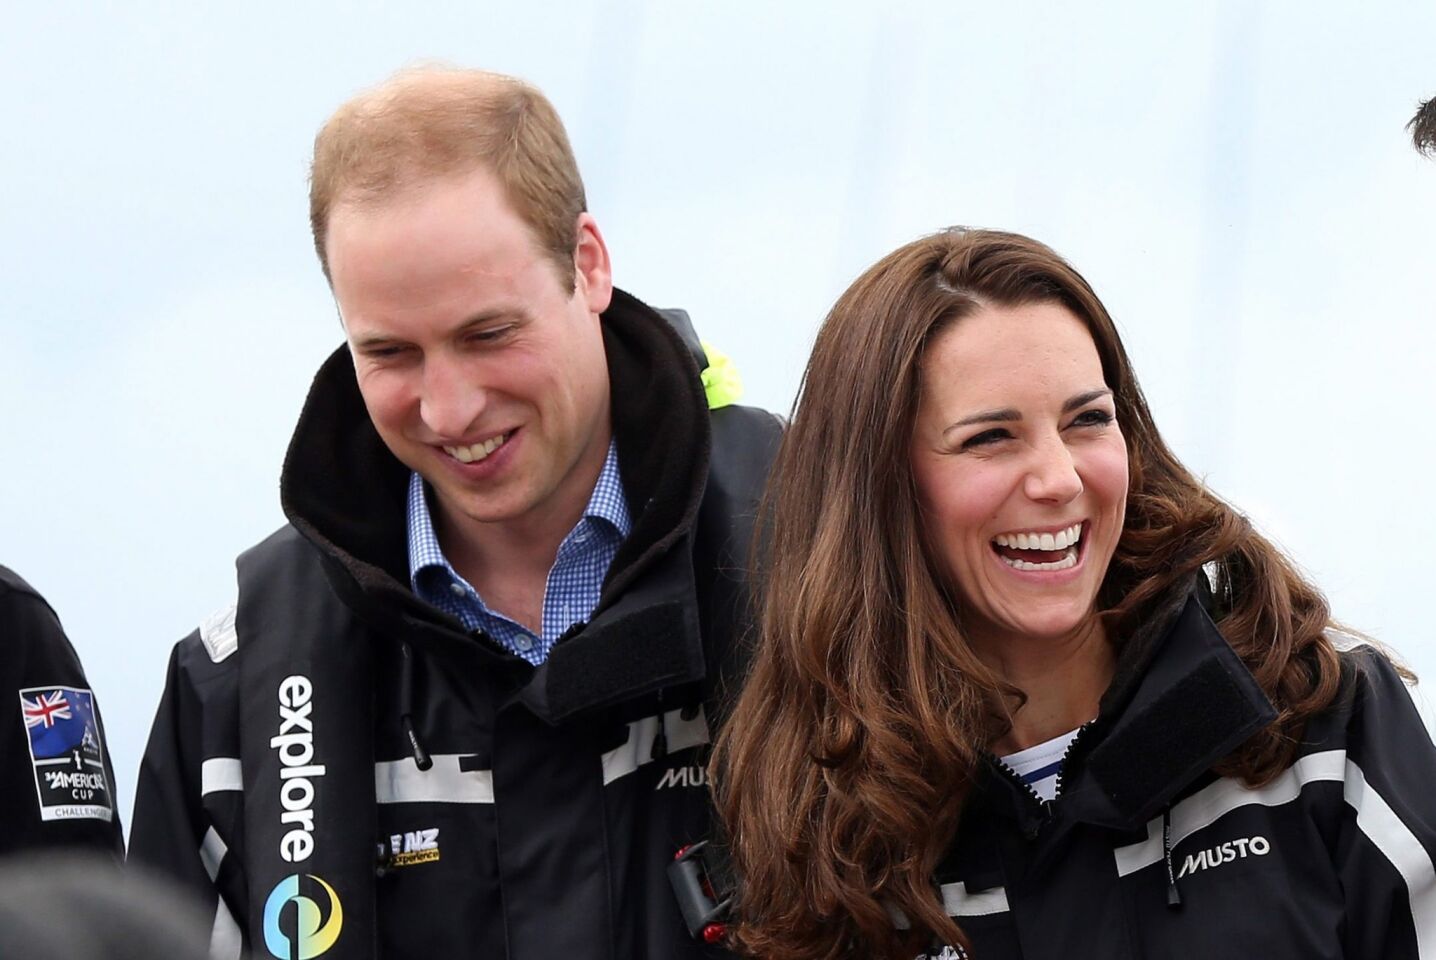 The couple share a smile before sailing with Team New Zealand on America's Cup yachts.